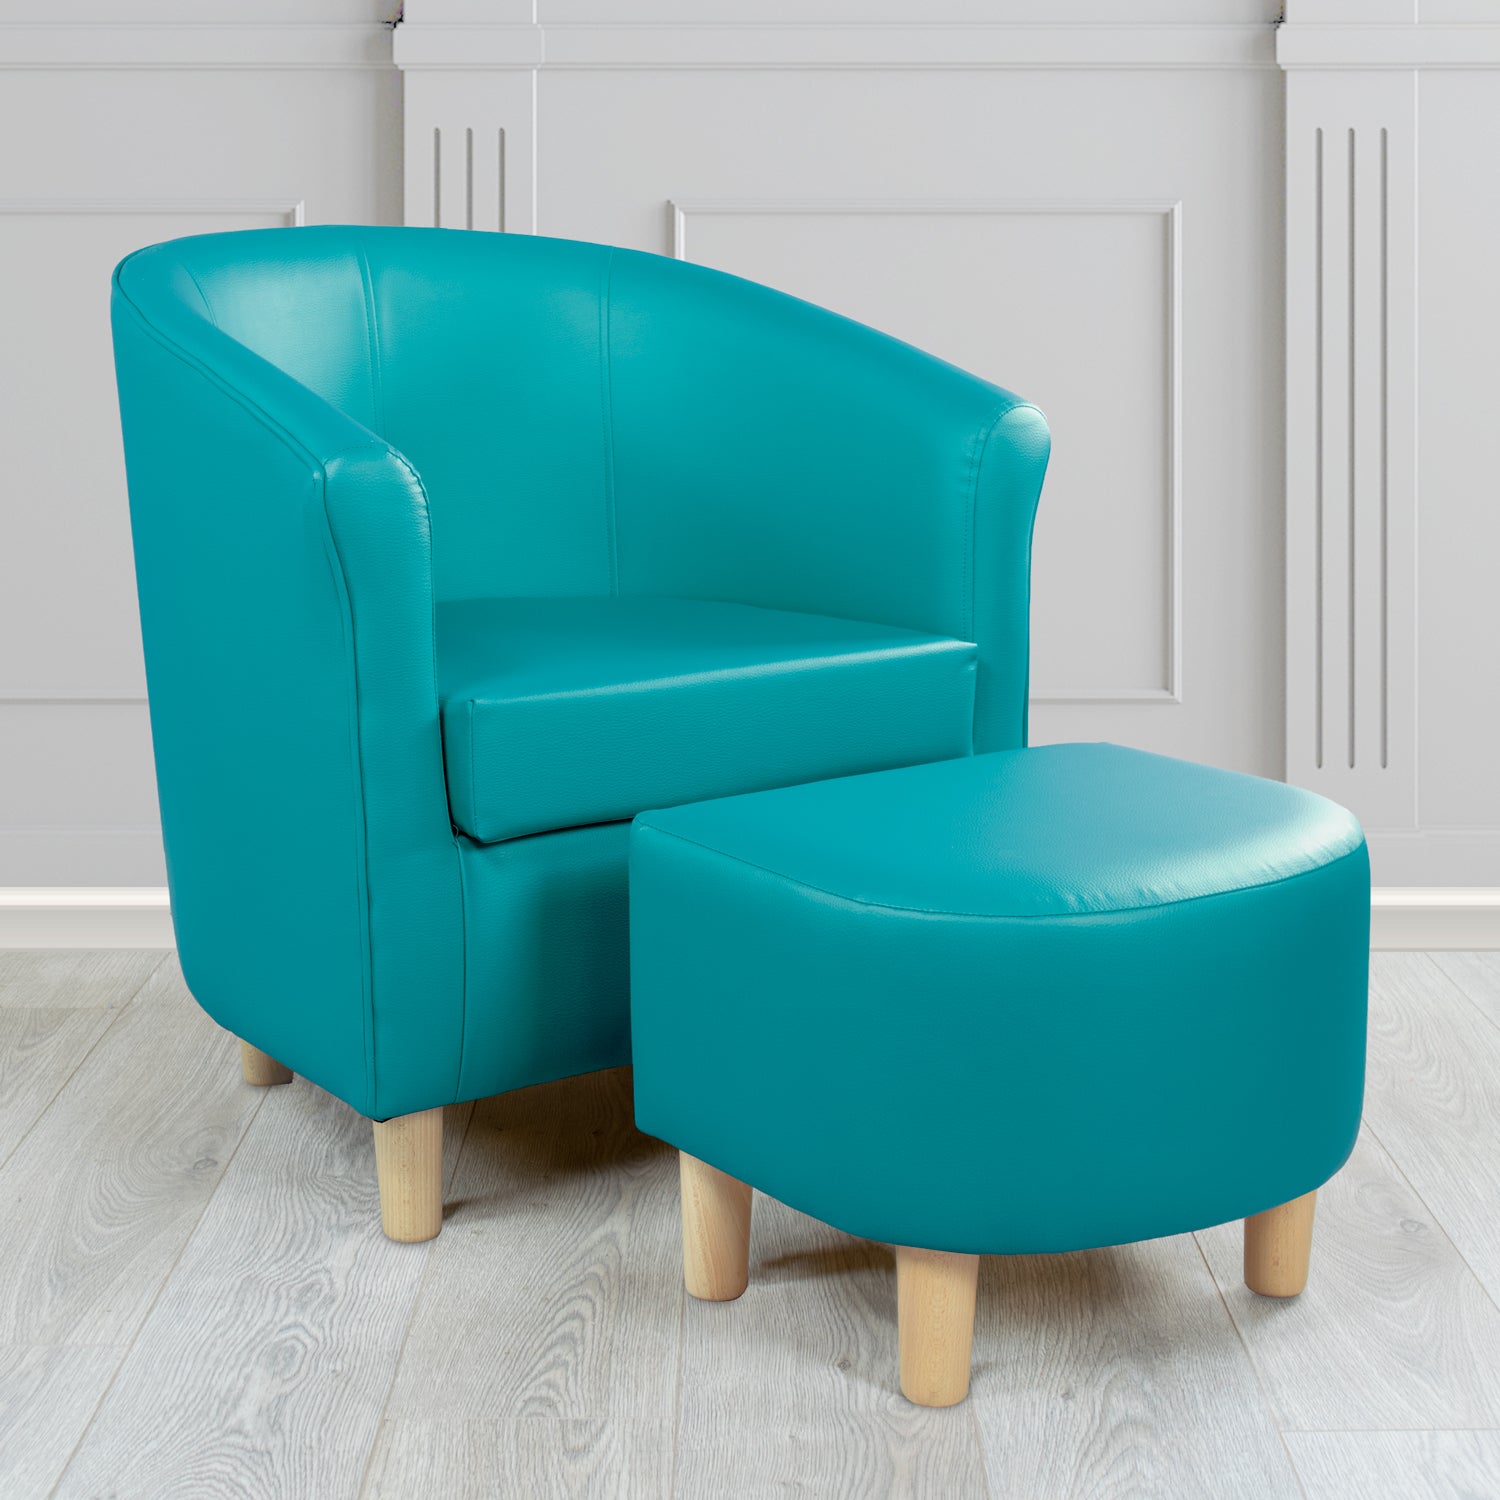 Tuscany Just Colour Calypso Faux Leather Tub Chair with Dee Footstool Set - The Tub Chair Shop